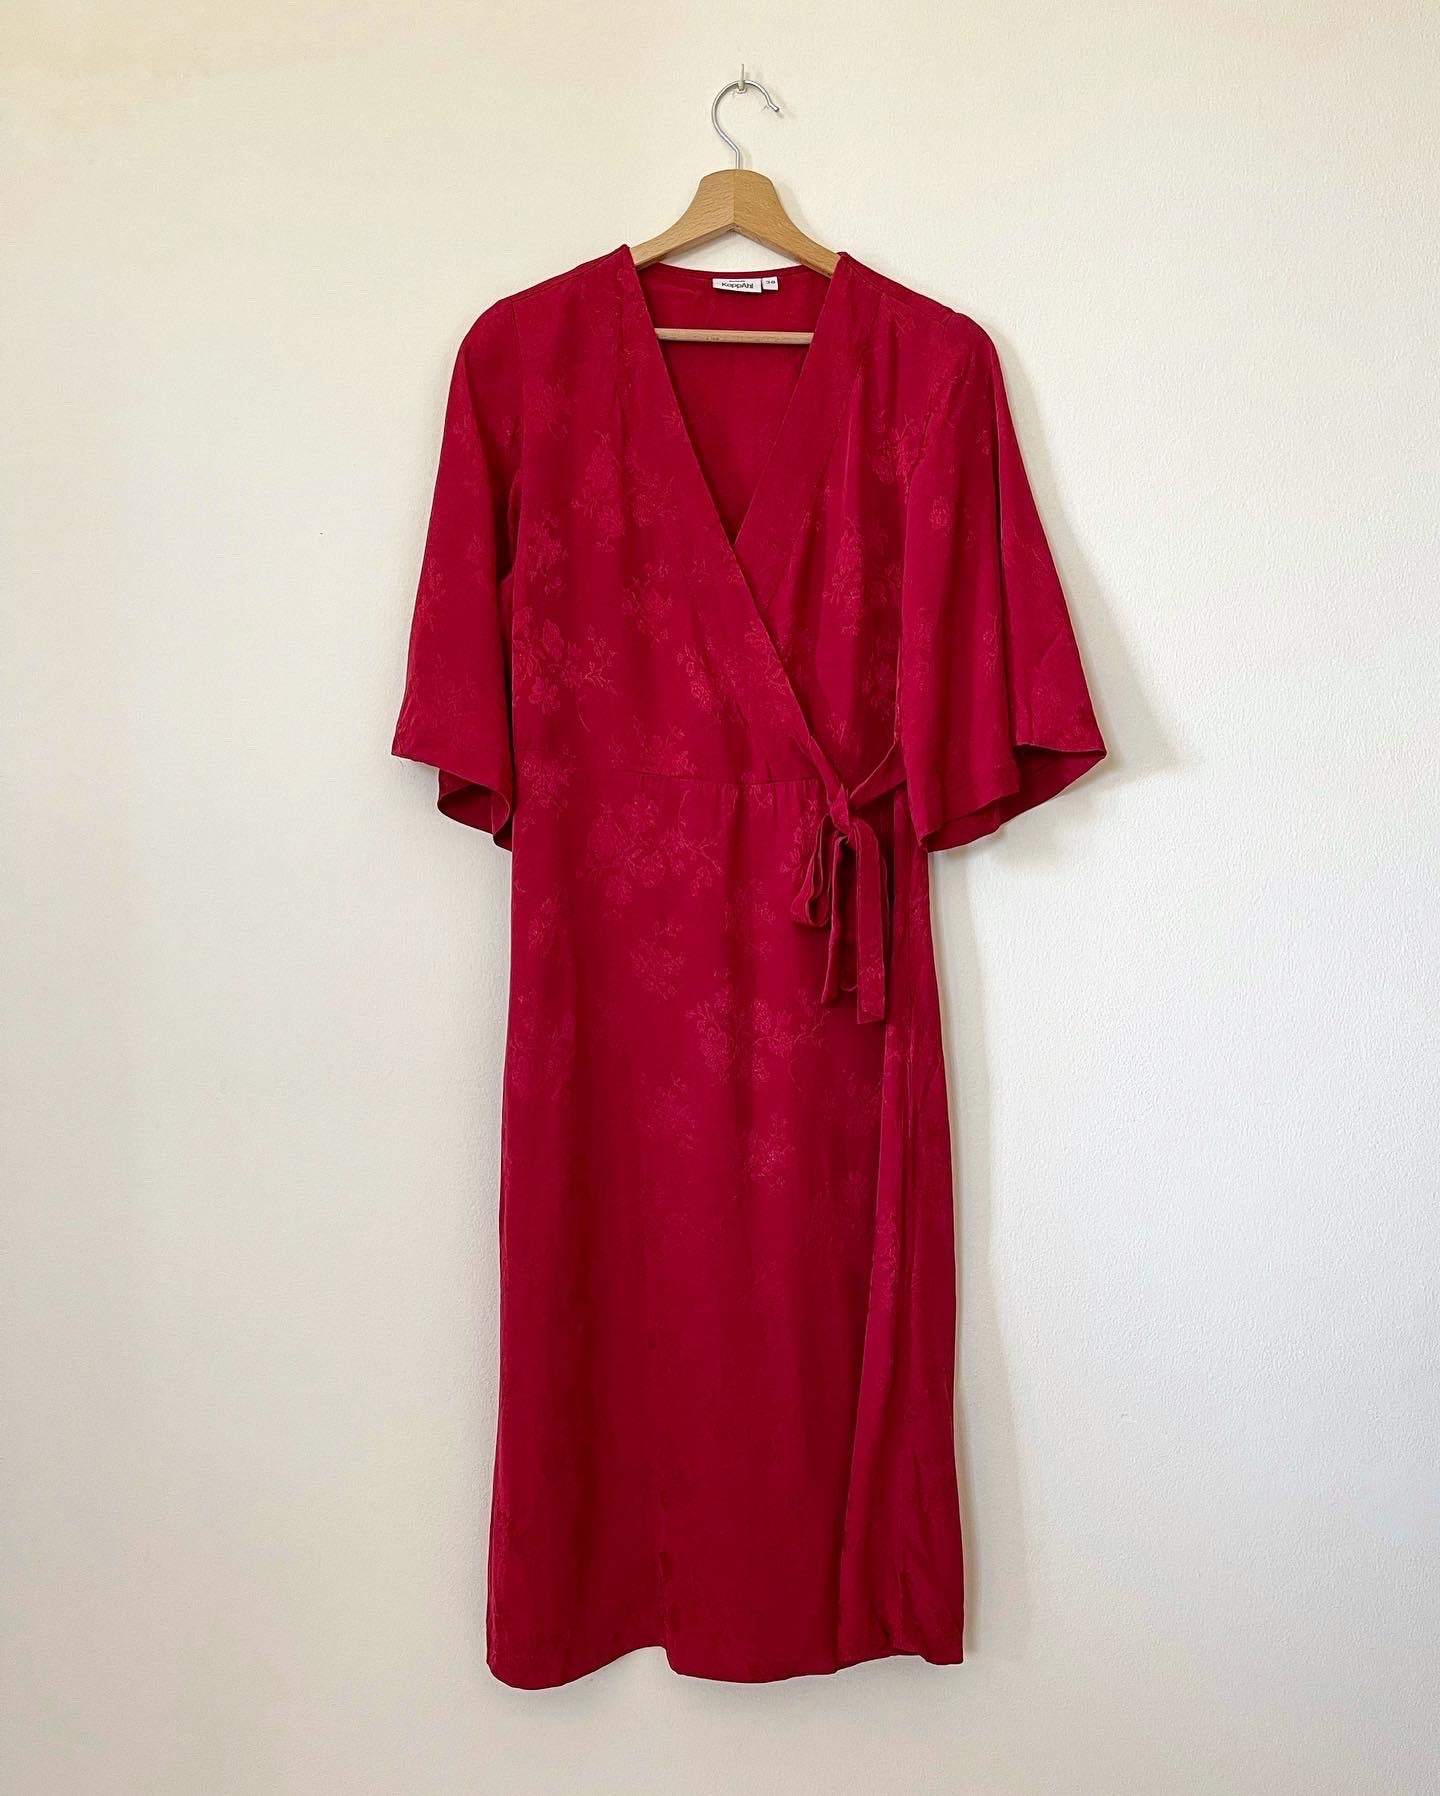 Beautiful feminine red dress made from viscose with jacquard pattern